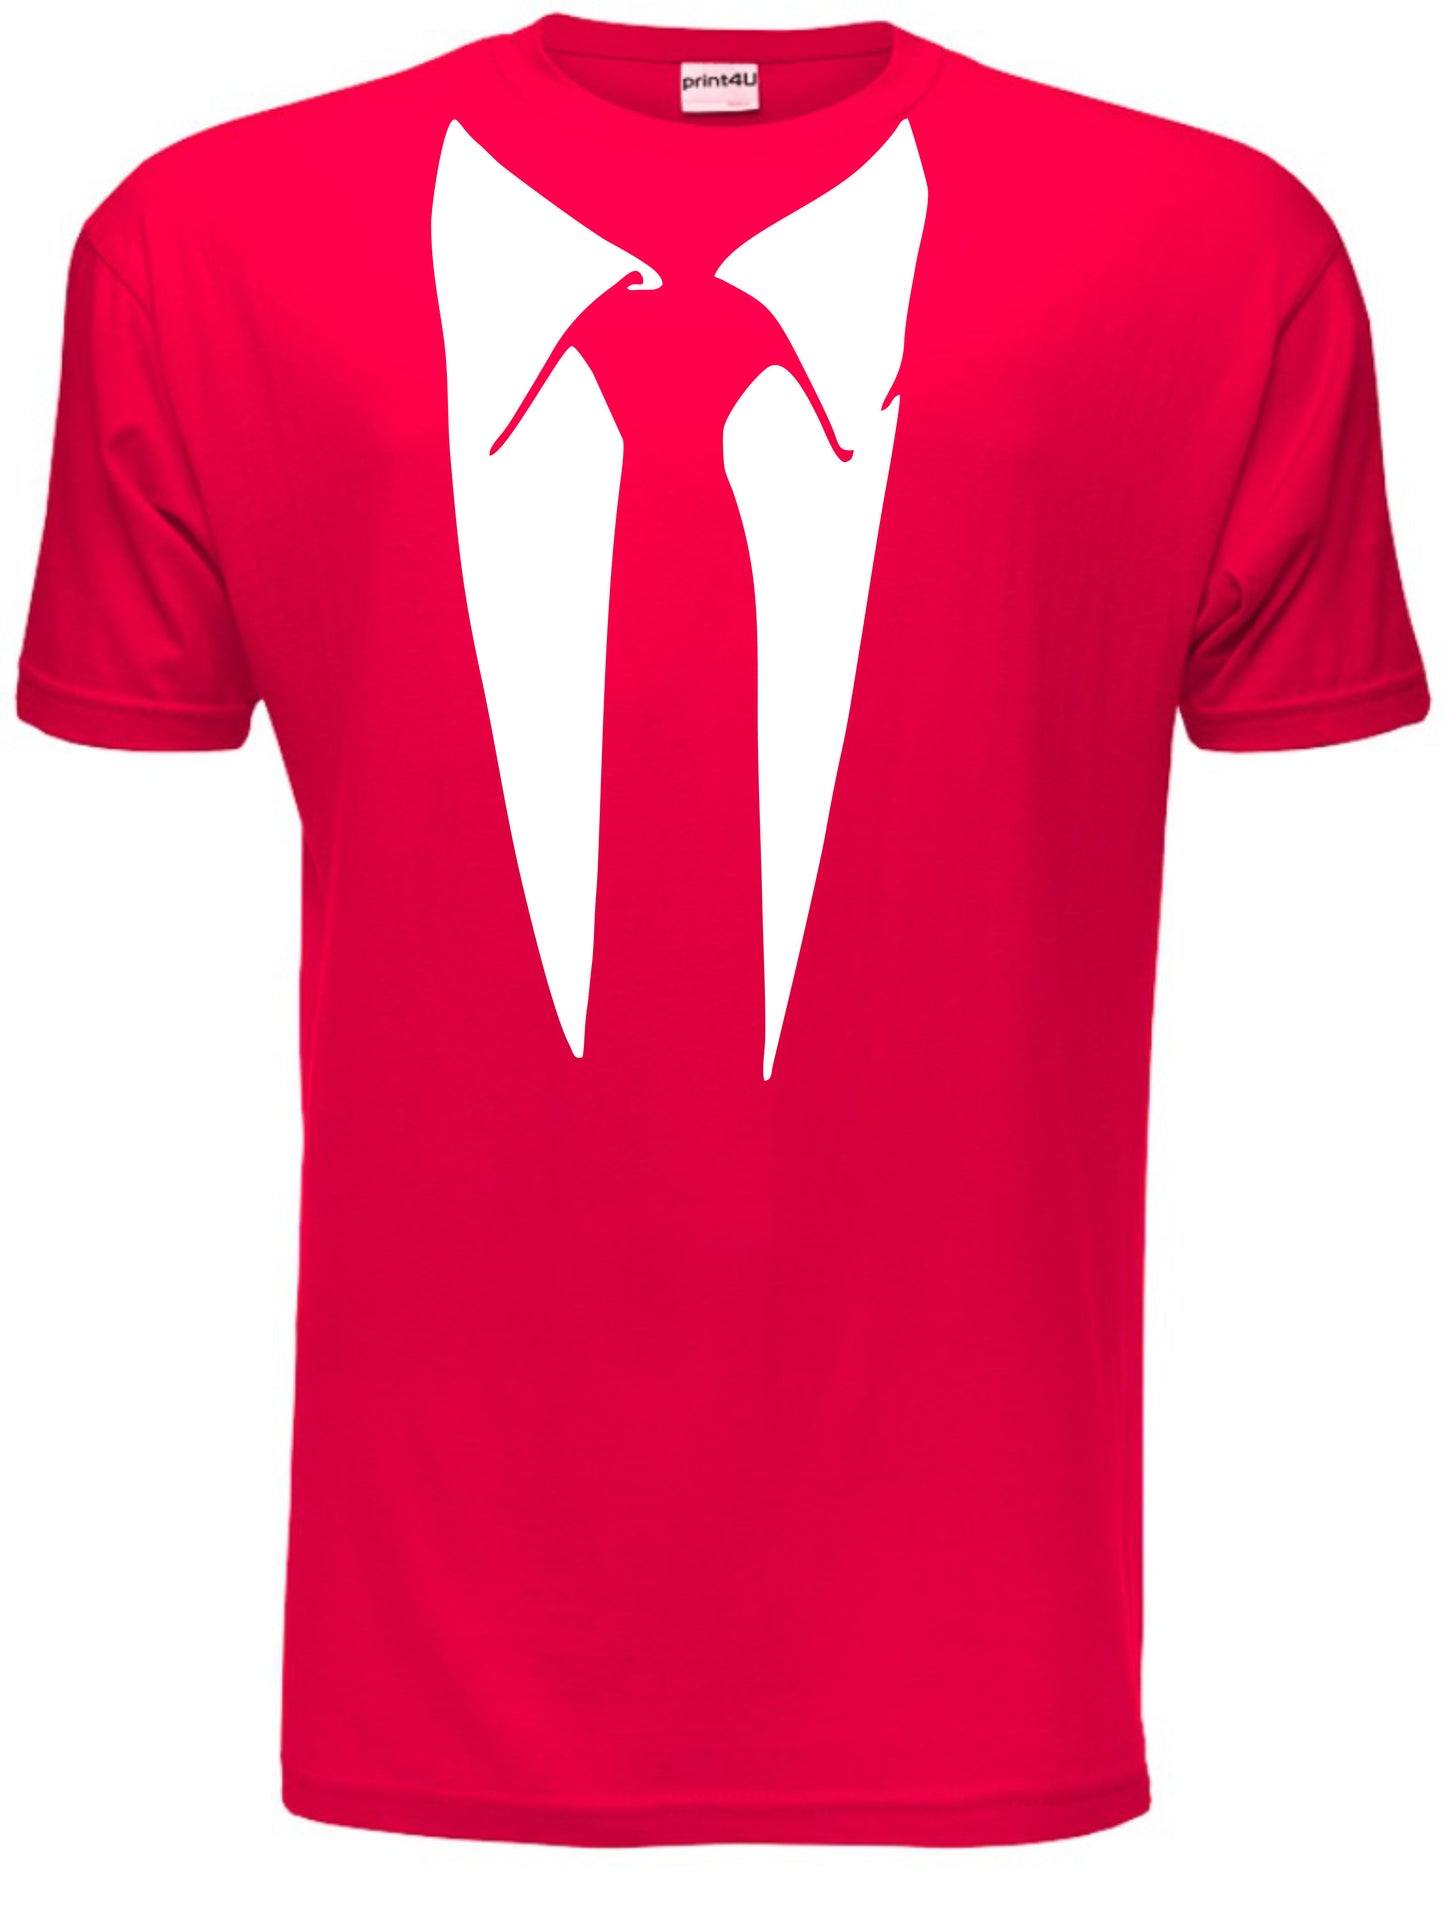 Tie With Collar Tuxedo Funny Gift Mens T-Shirt Size S-XXL